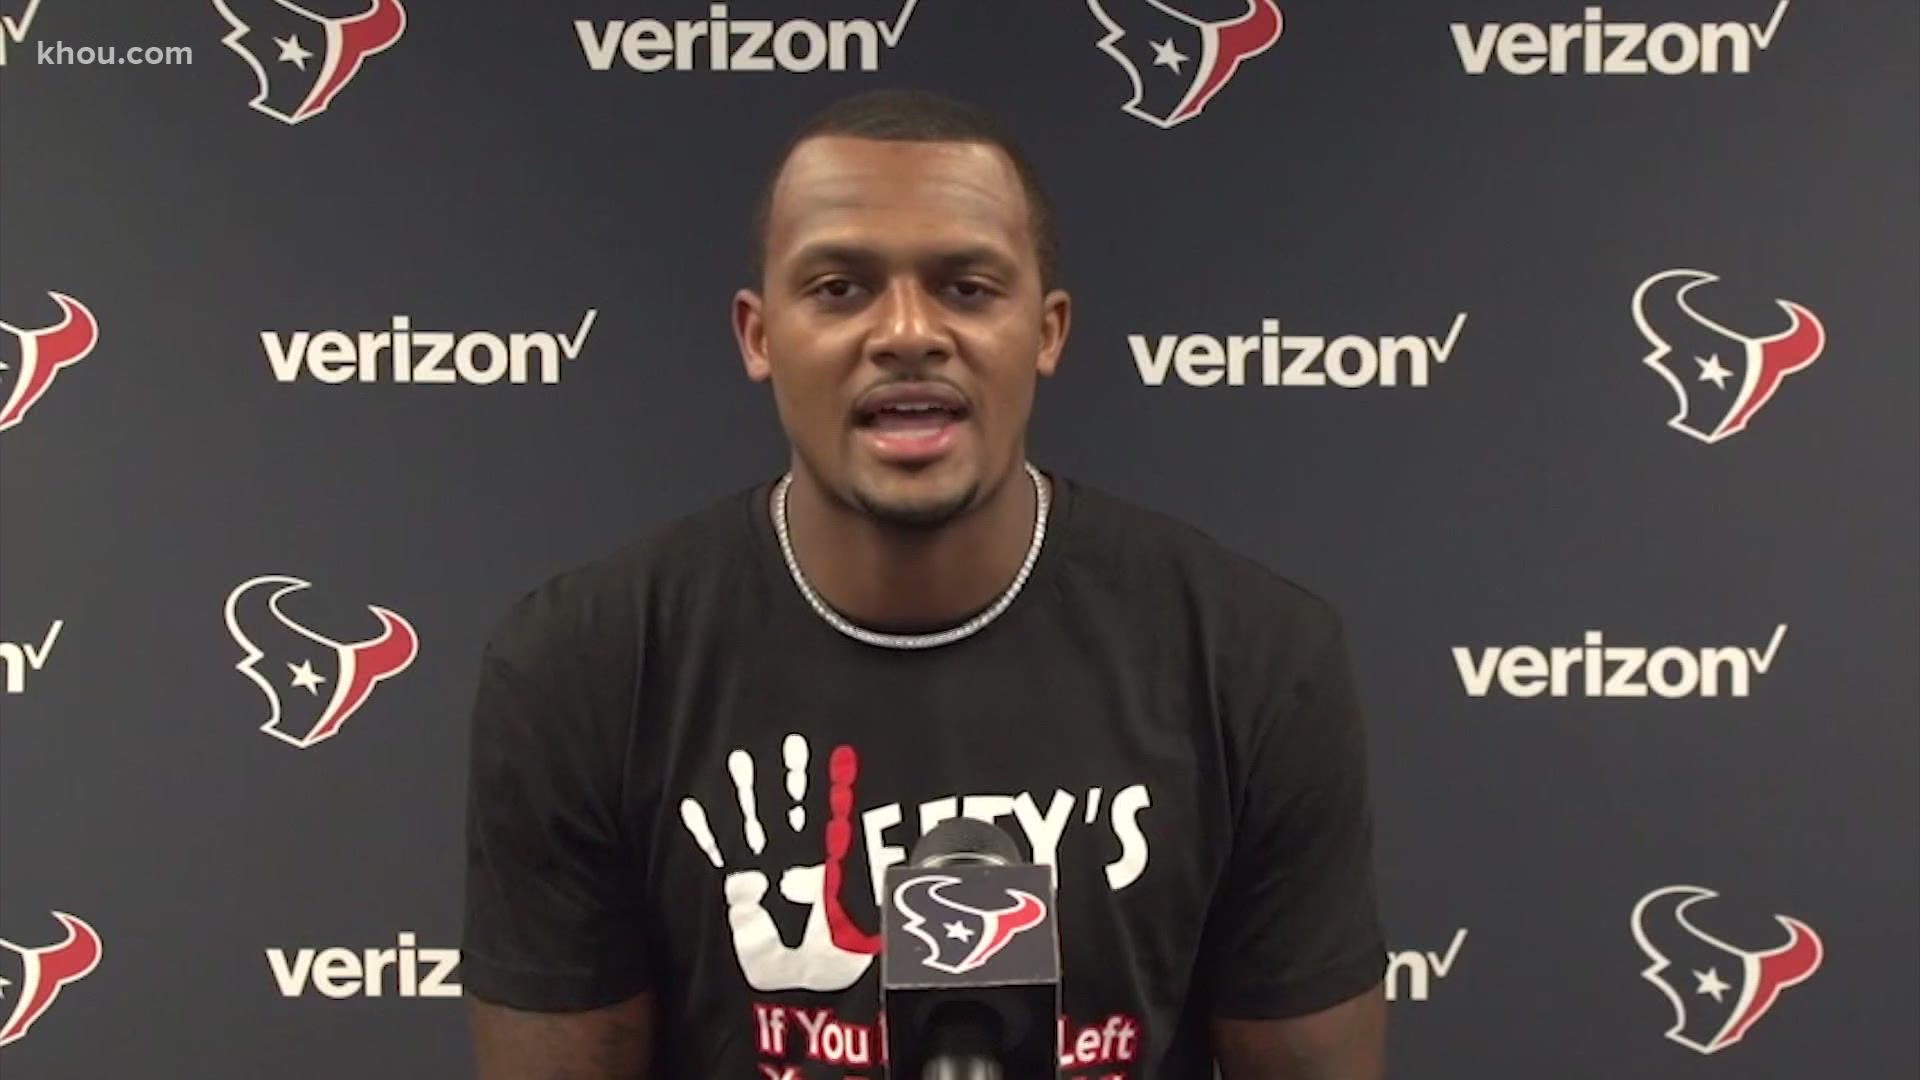 Texans quarterback Deshaun Watson got emotional during his news conference while talking about his family and supporters after signing a massive contract extension.